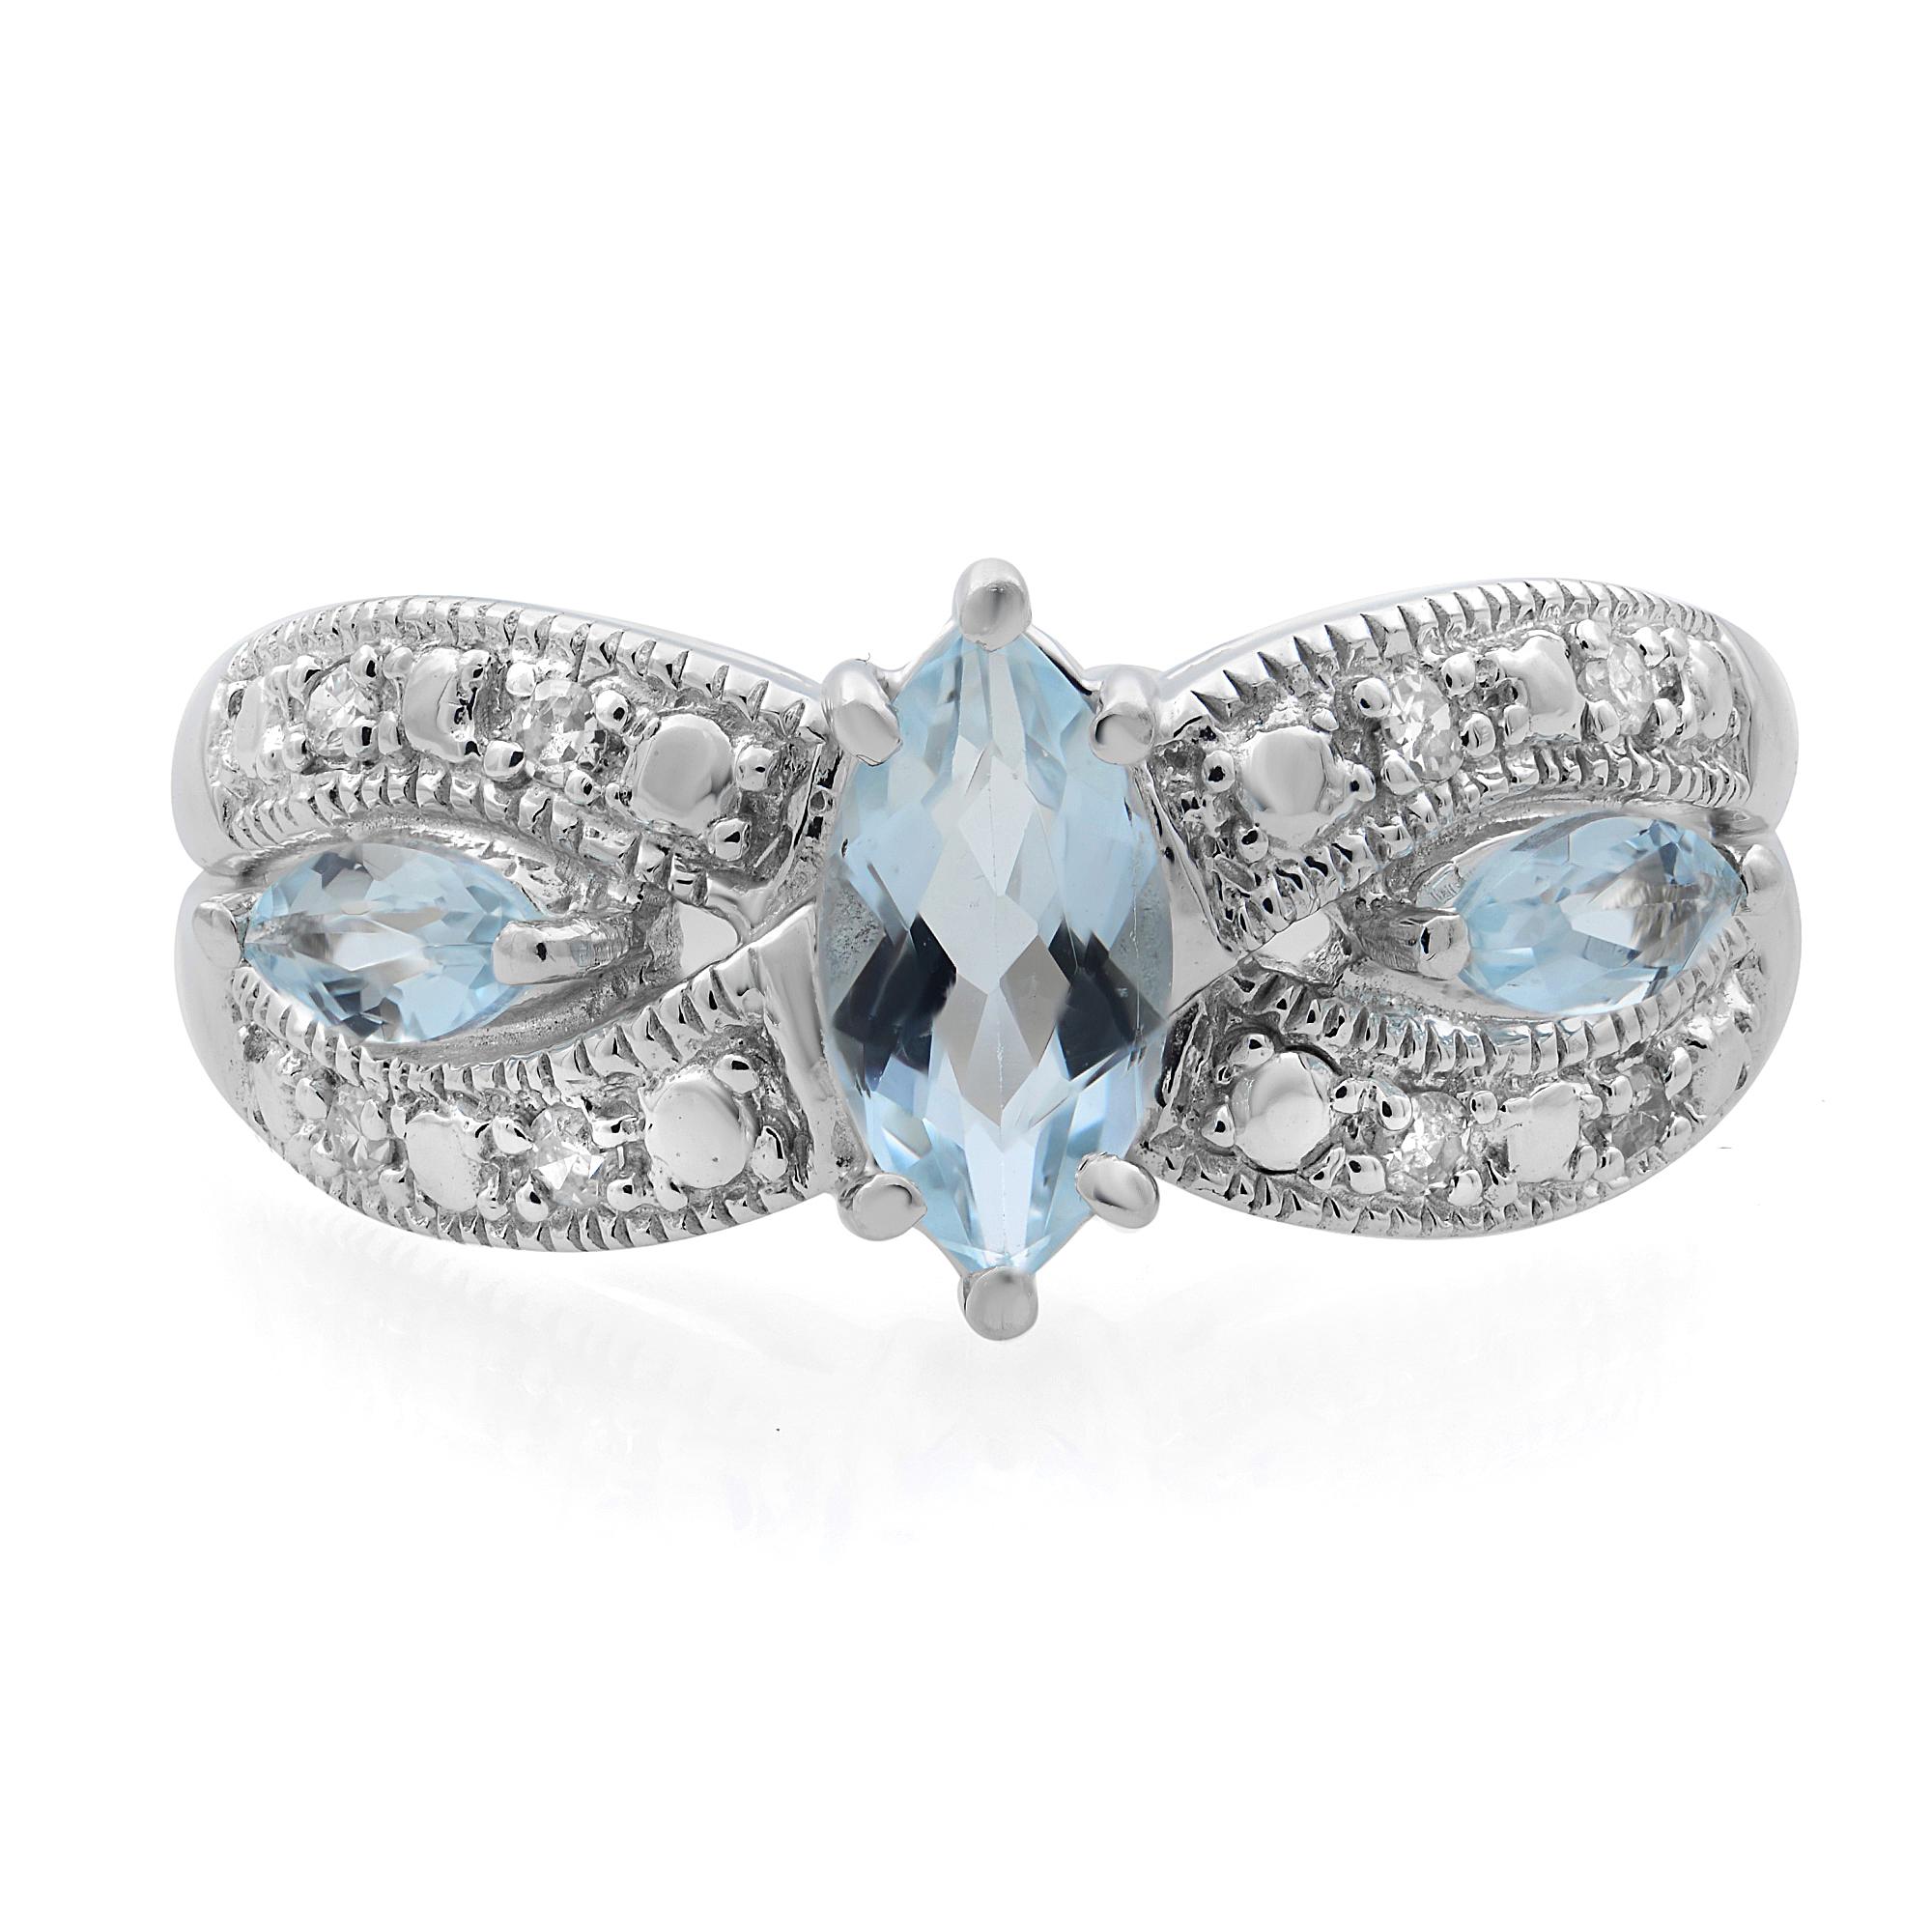 This beautiful ladies cocktail ring features 3 marquise cut aquamarines of 1.00cttw and 8 round diamonds of 0.10cttw, all set with prongs. Ring size 7. Comes with presentable box and papers. 